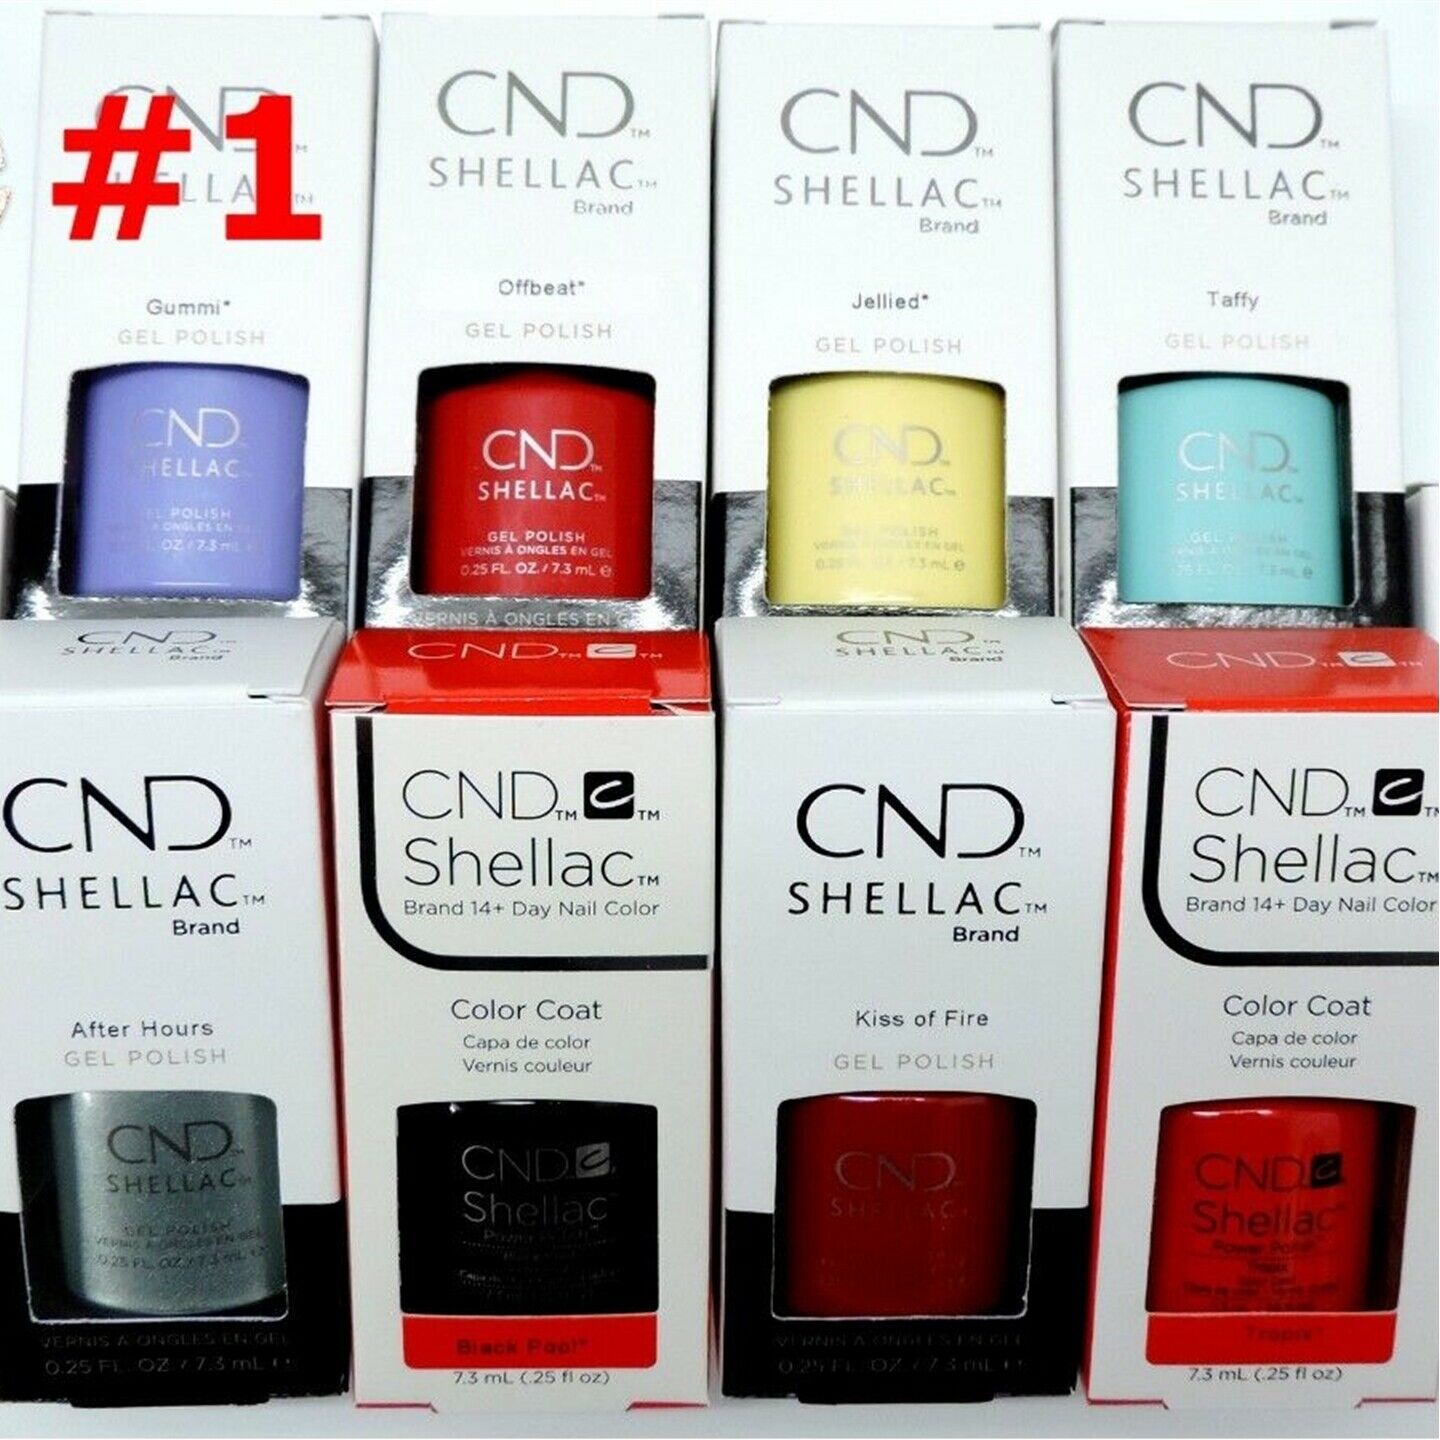 Cnd Shellac Gelcolor Nail Polish /base /top /brand New Gel Color #1 - Choose Any